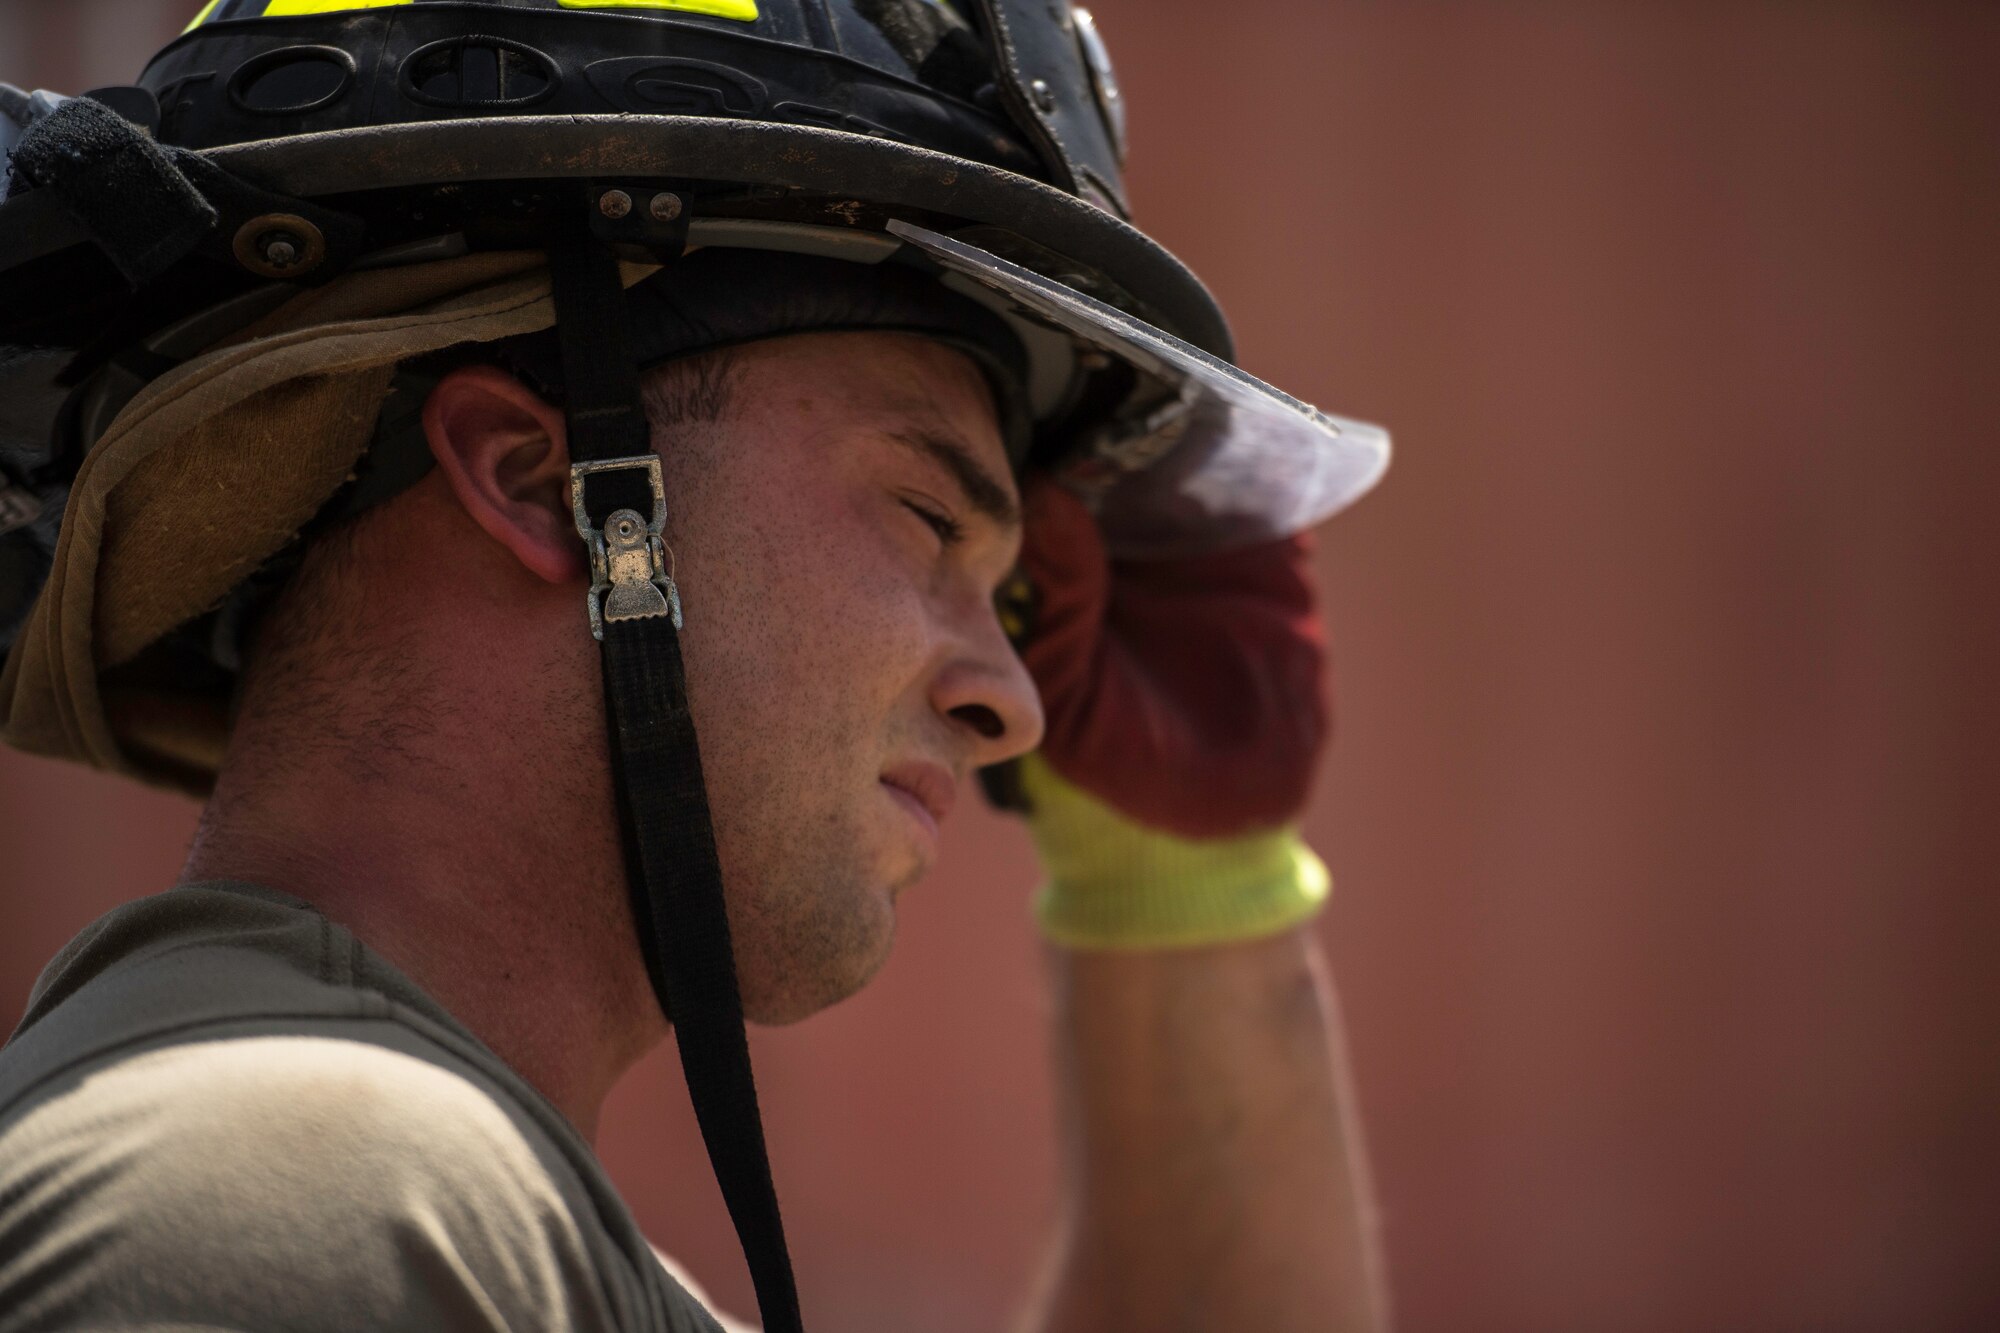 U.S. Air Force Senior Airman Logan Reed, 870th Air Expeditionary Squadron firefighter, adjusts his helmet at Chabelley Airfield, Djibouti, June 11, 2019. The 870th AES firefighters support the mission in East Africa by providing emergency services to the 449th Air Expeditionary Group and their assets. (U.S. Air Force photo by Staff Sgt. Devin Boyer)